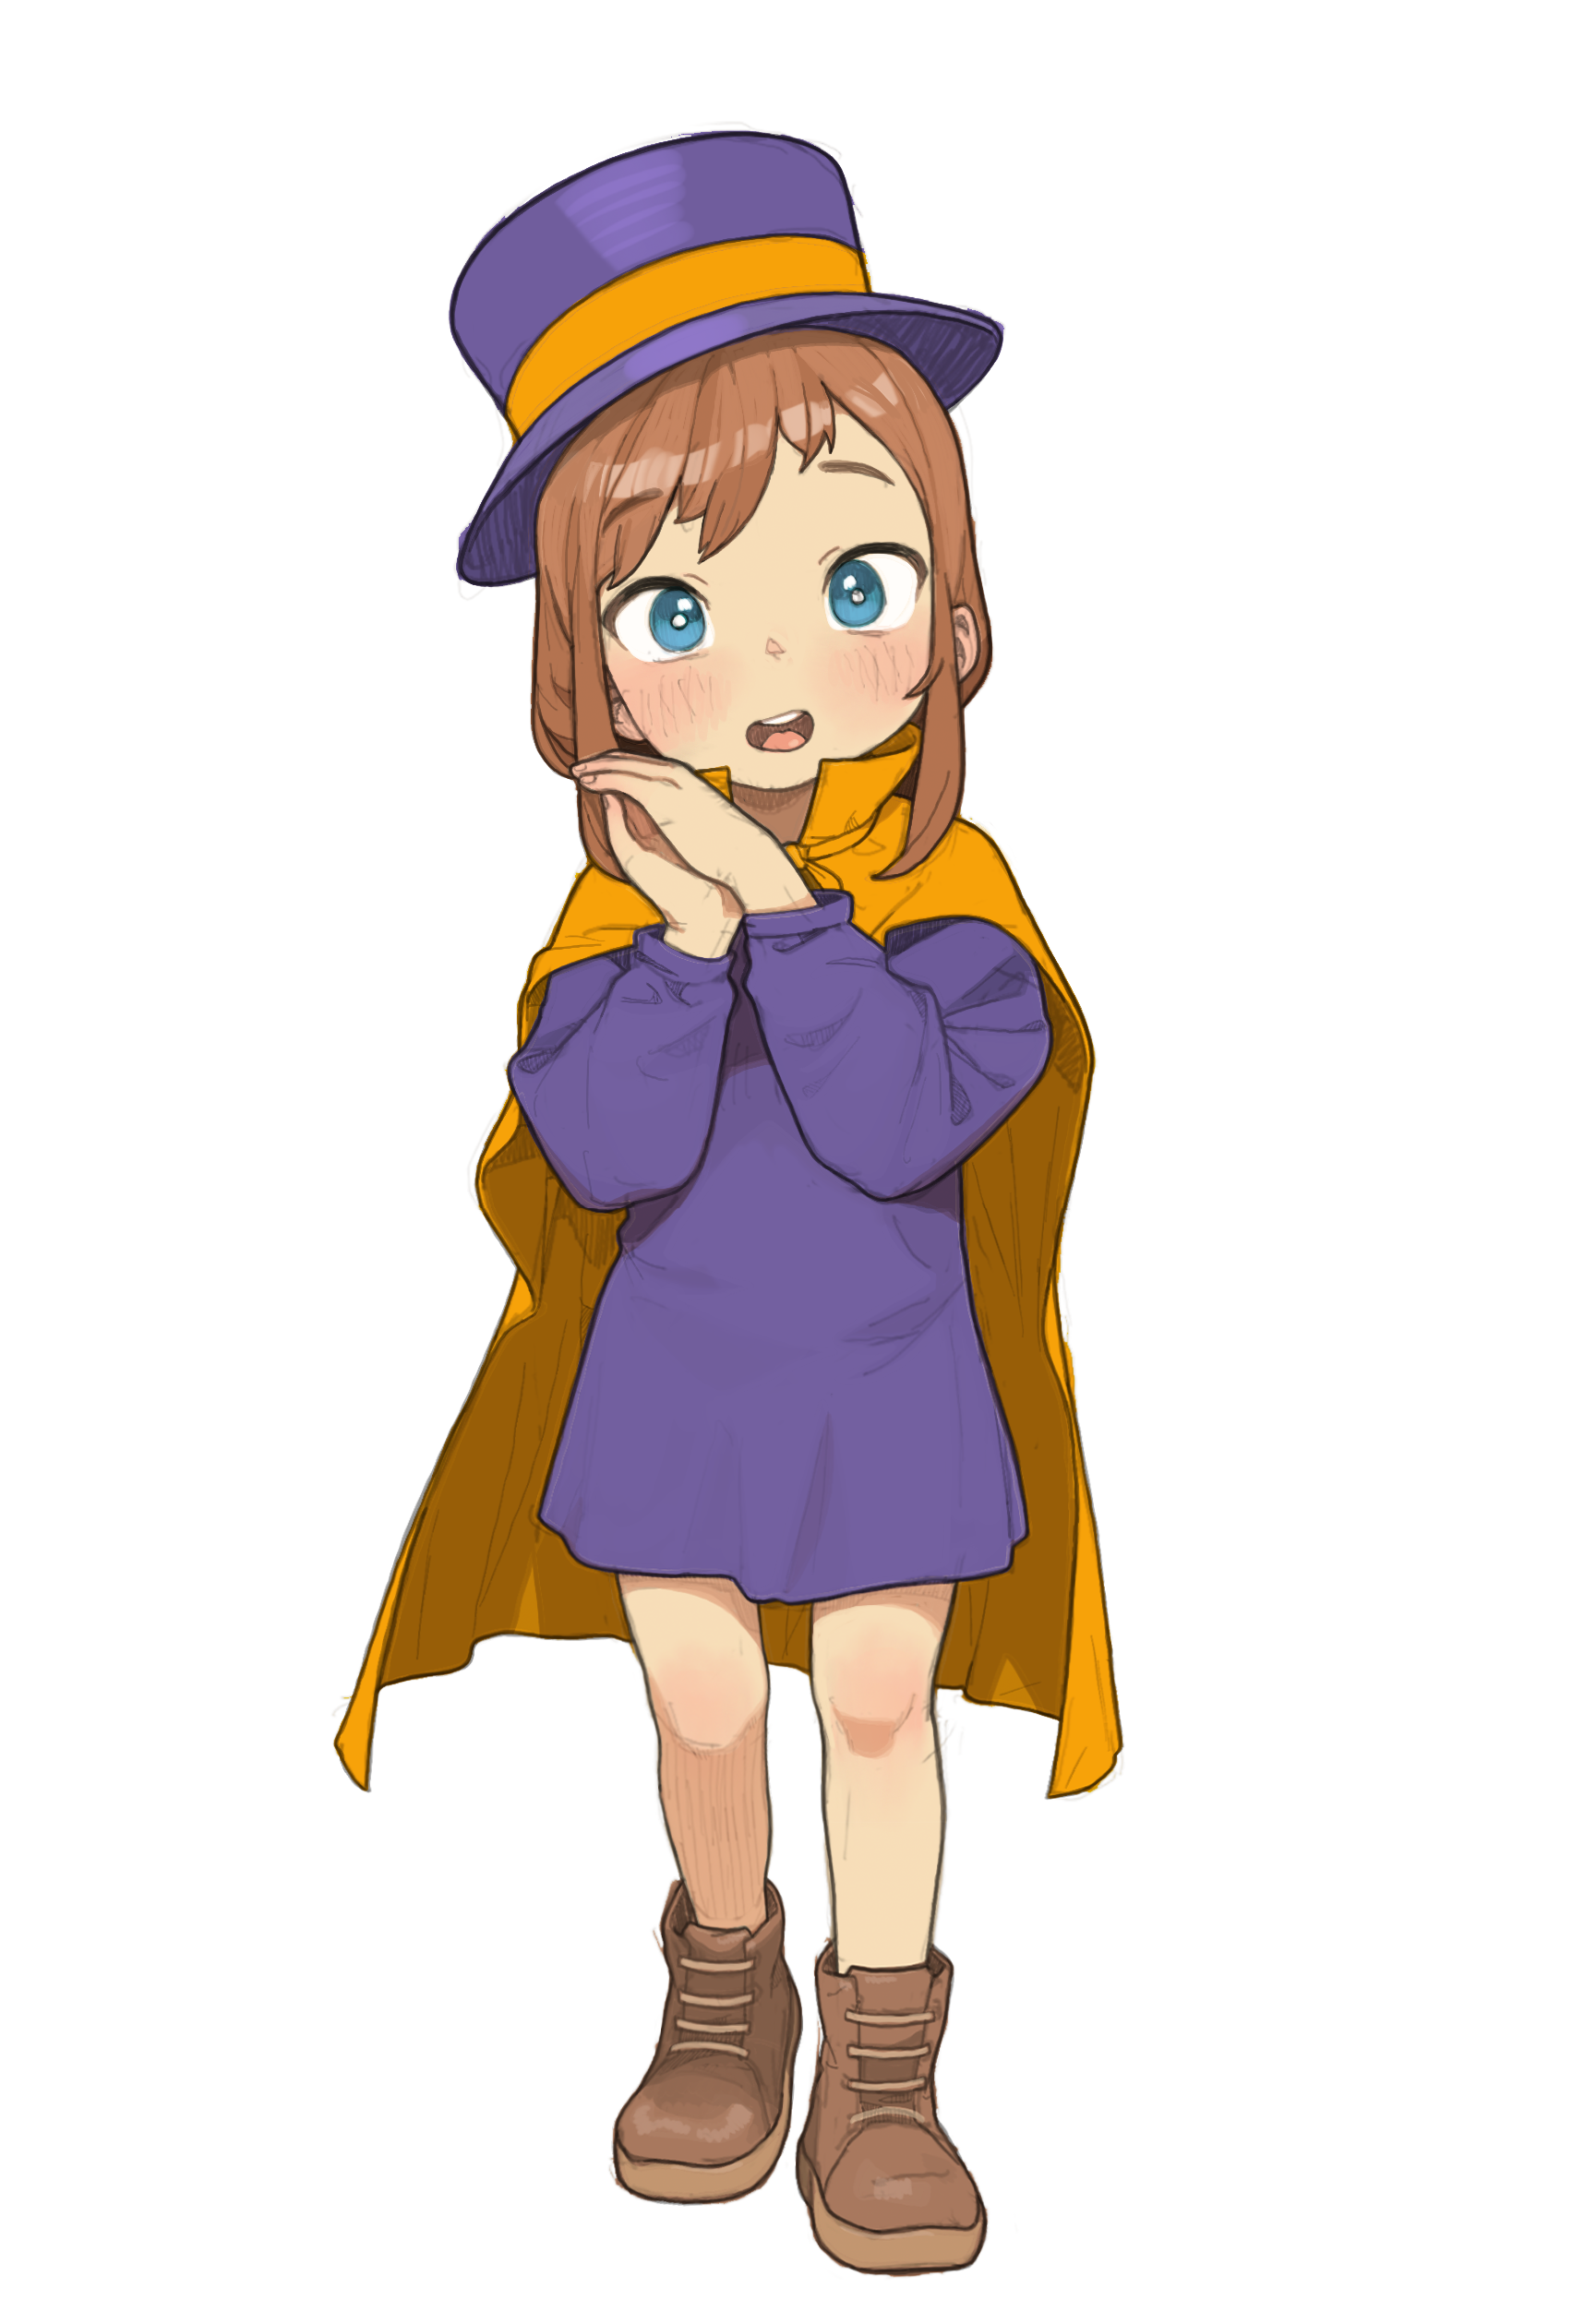 A Hat in Time - Download